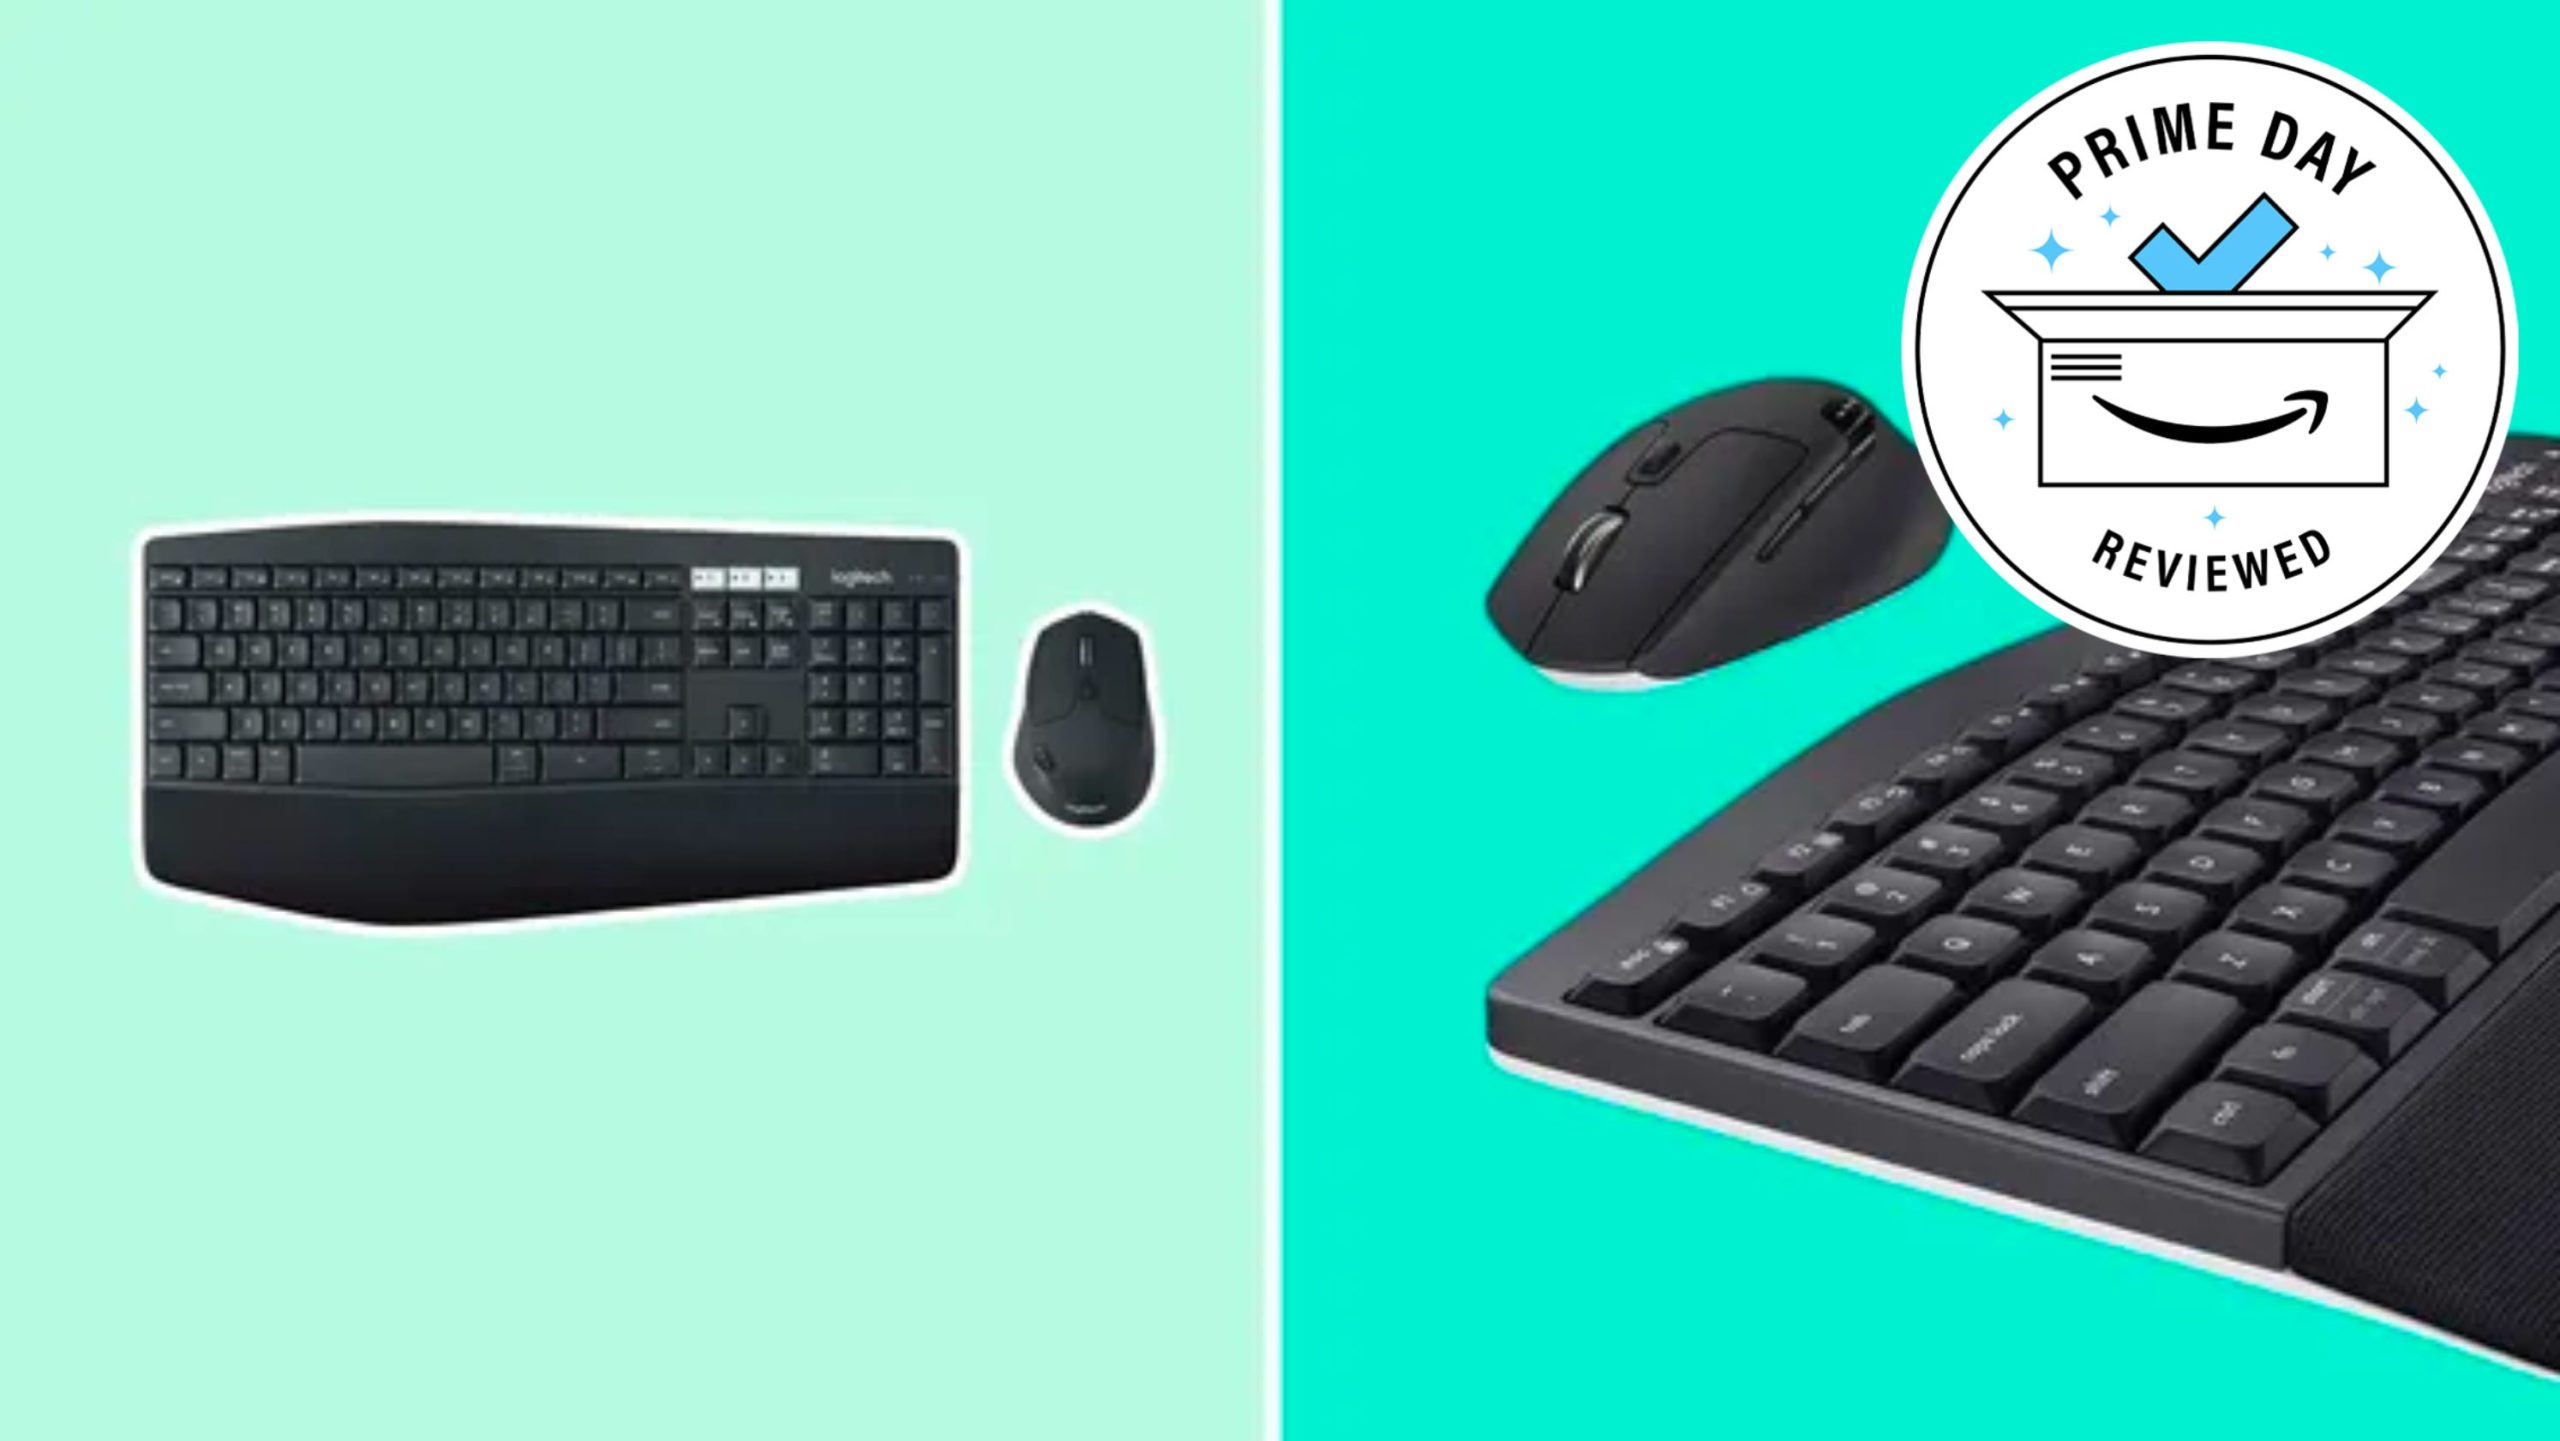 Logitech Prime Day Deals Announced: Up to 50% Off on Cutting-Edge Tech! Don't Miss Out! 20